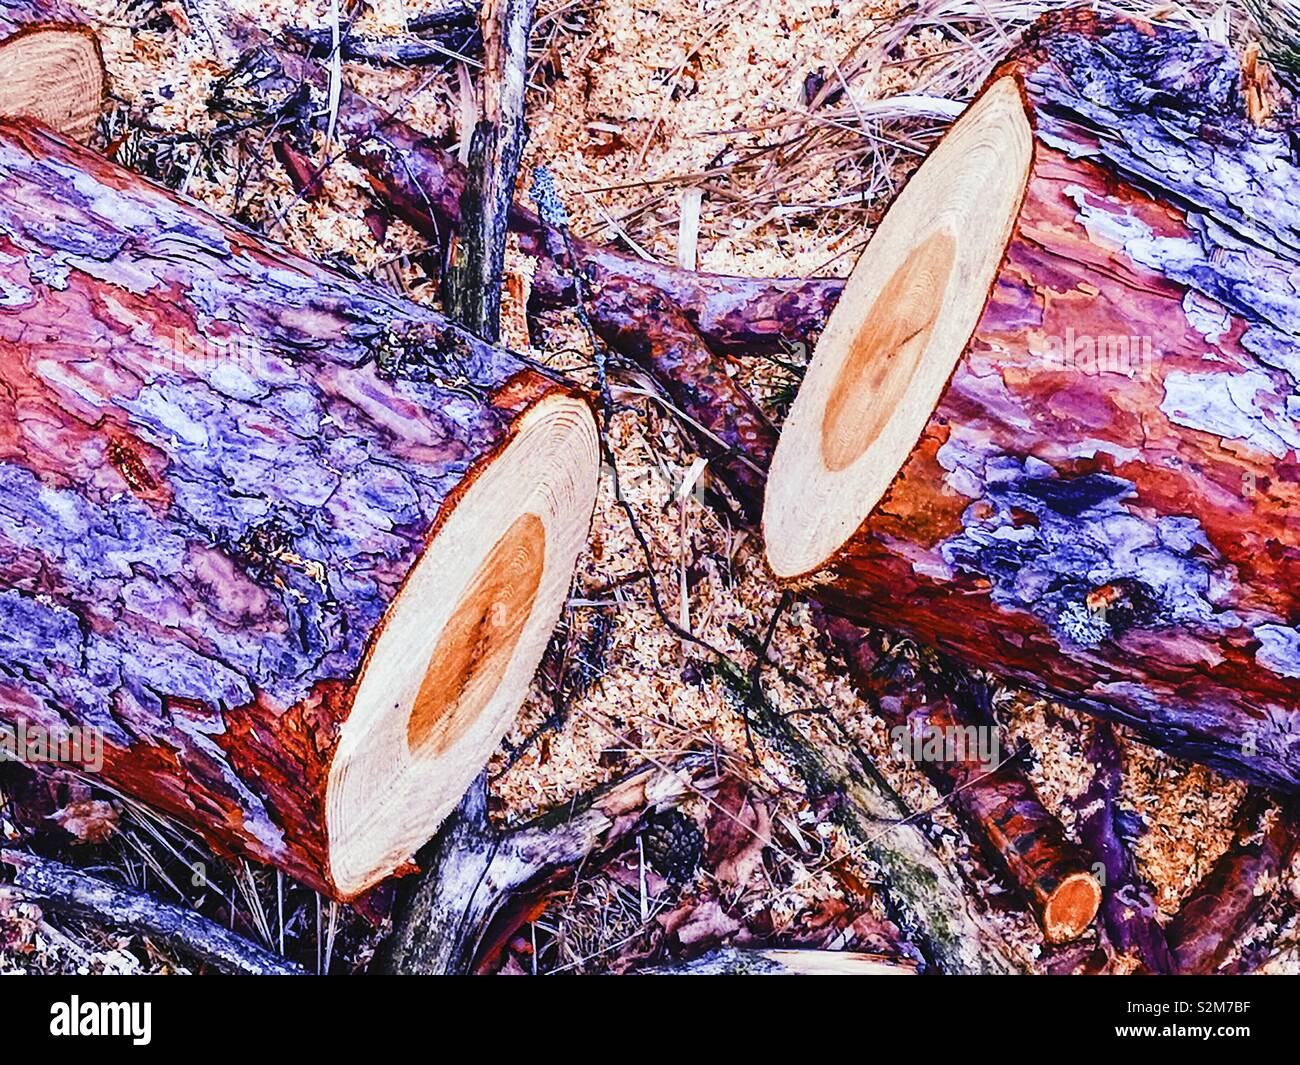 Sawed ends of colourful freshly cut logs, Sweden, Scandinavia Stock Photo